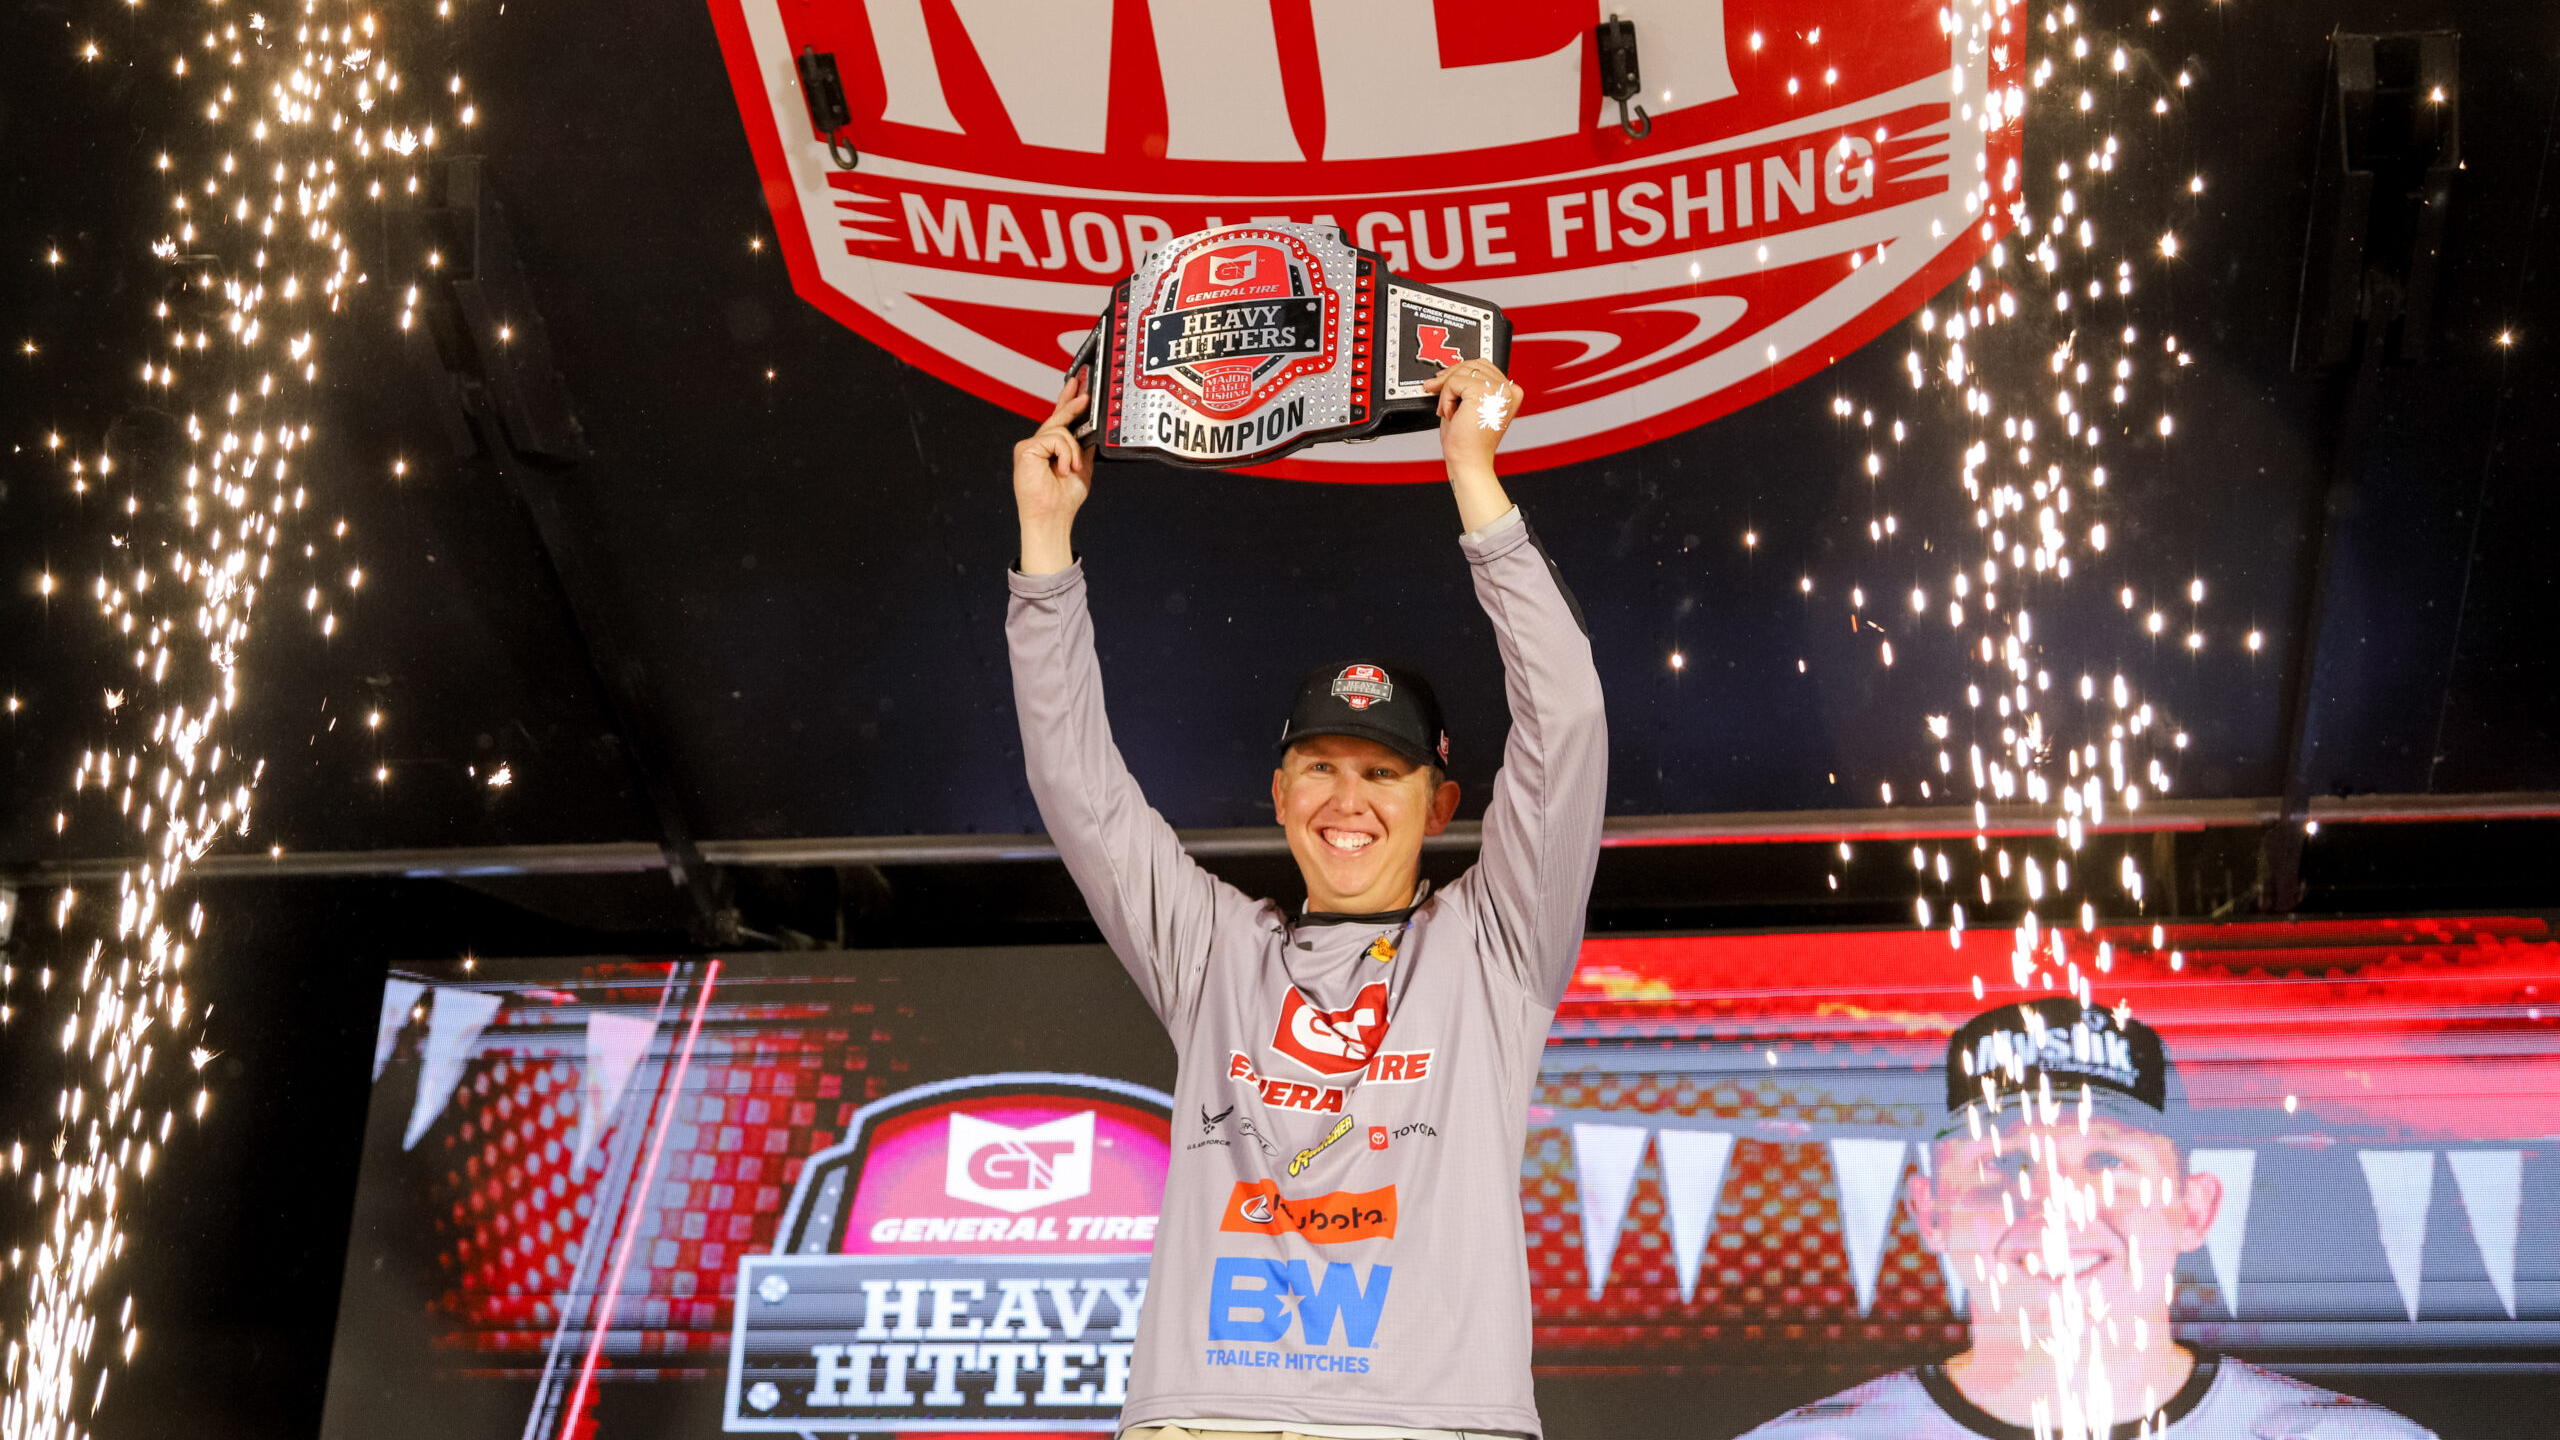 Bass Pro Tour, Heavy Hitters – Post Game (4/29/2023) - Major League Fishing